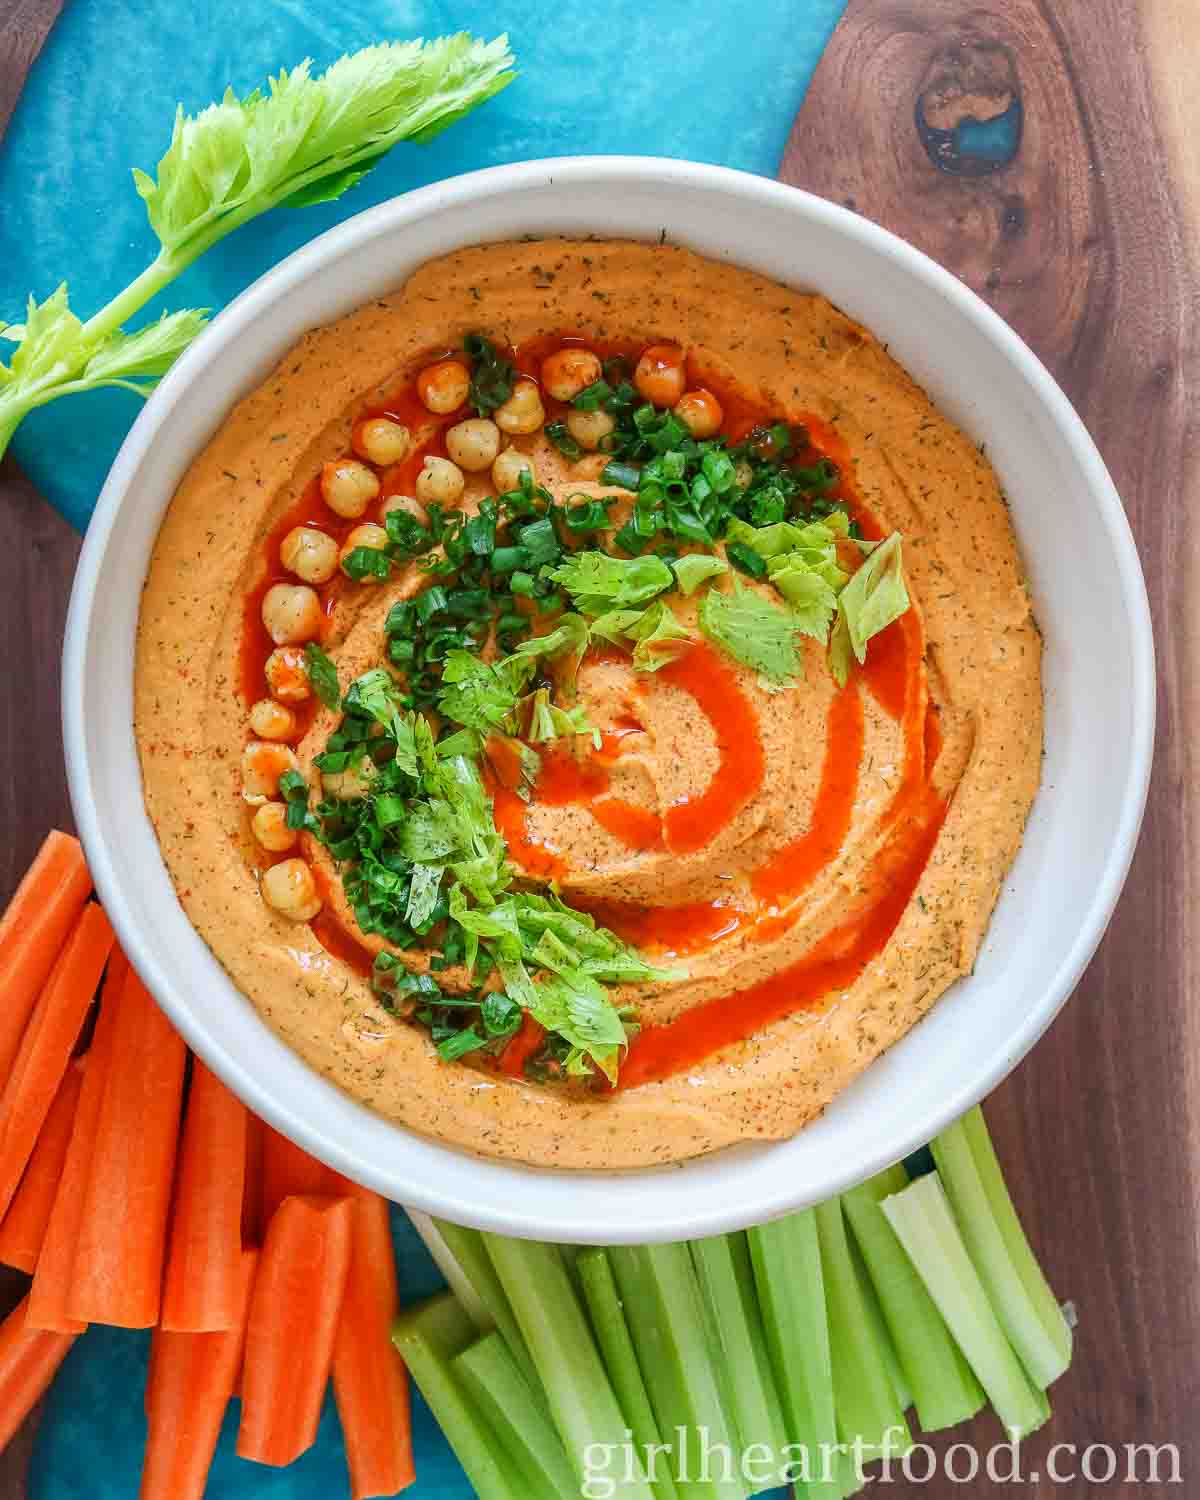 Bowl of buffalo hummus garnished with toppings, next to carrot sticks and celery sticks.